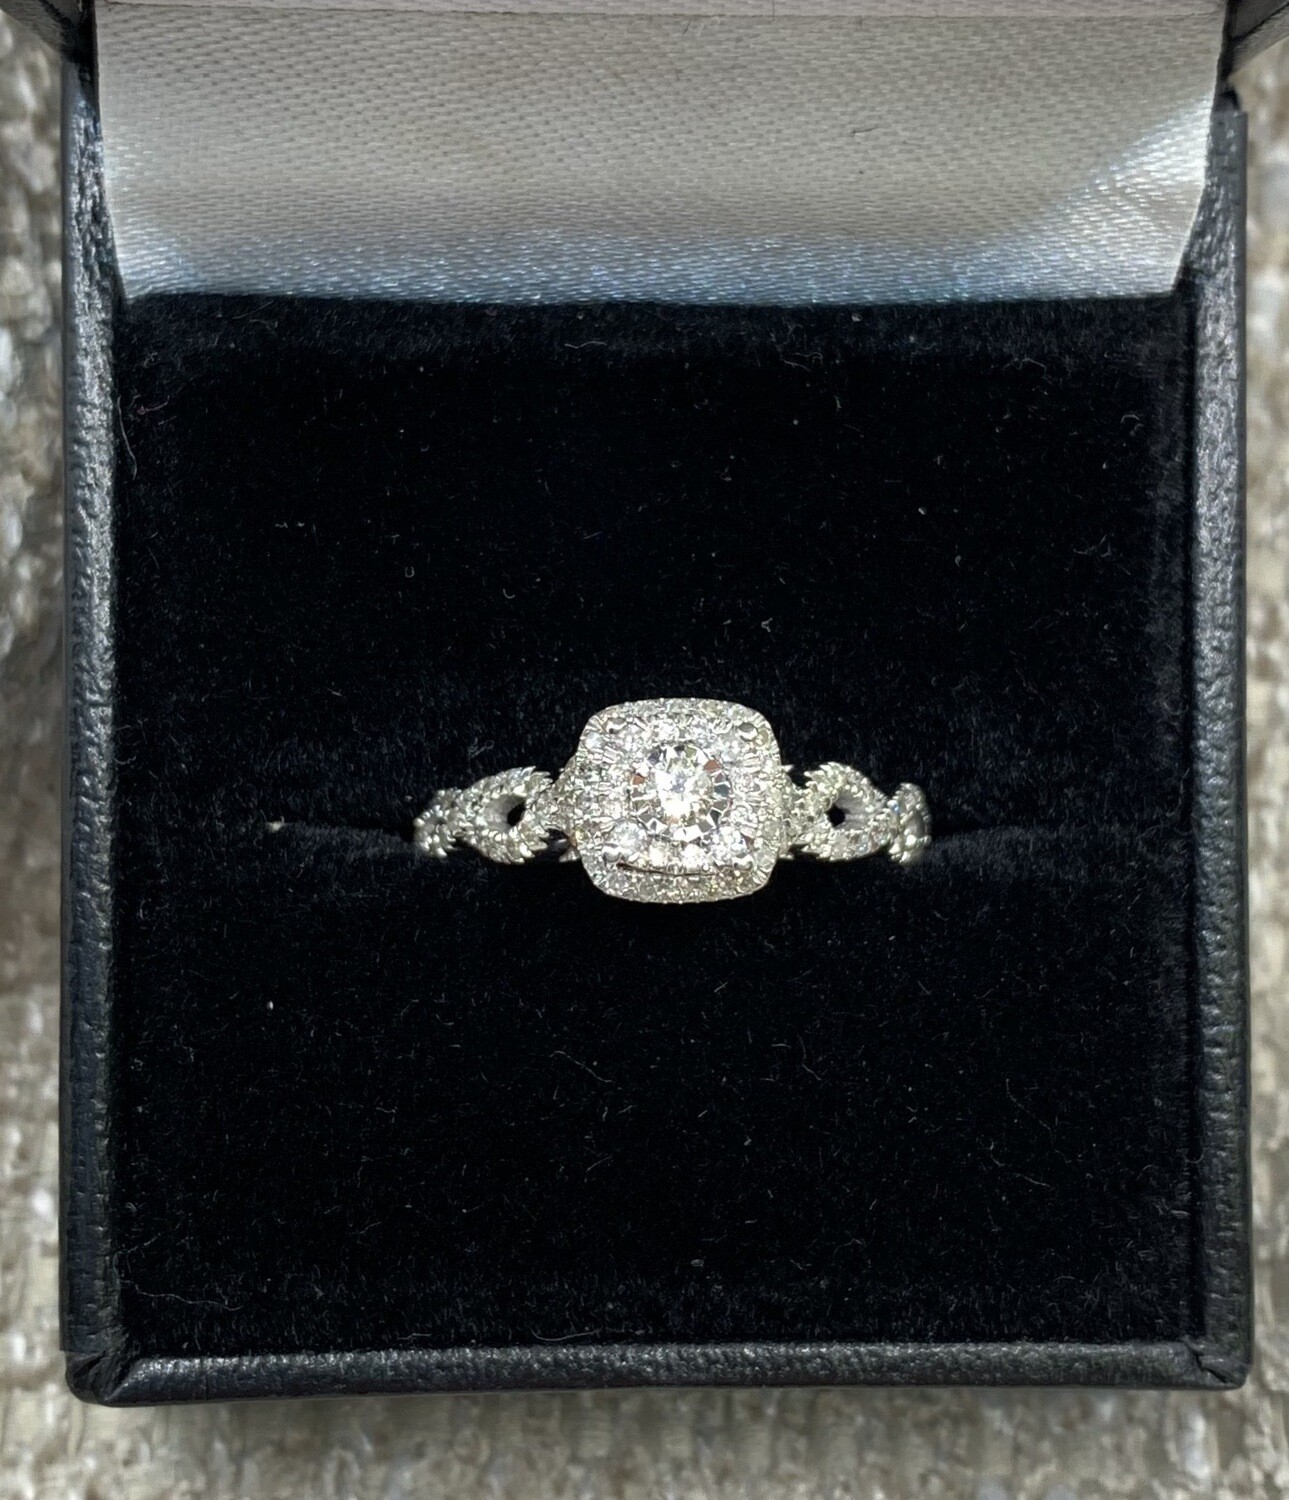 Diamond Engagement Ring 35 Pts. Total Weight set in a Fancy 14 Kt. White Gold Setting